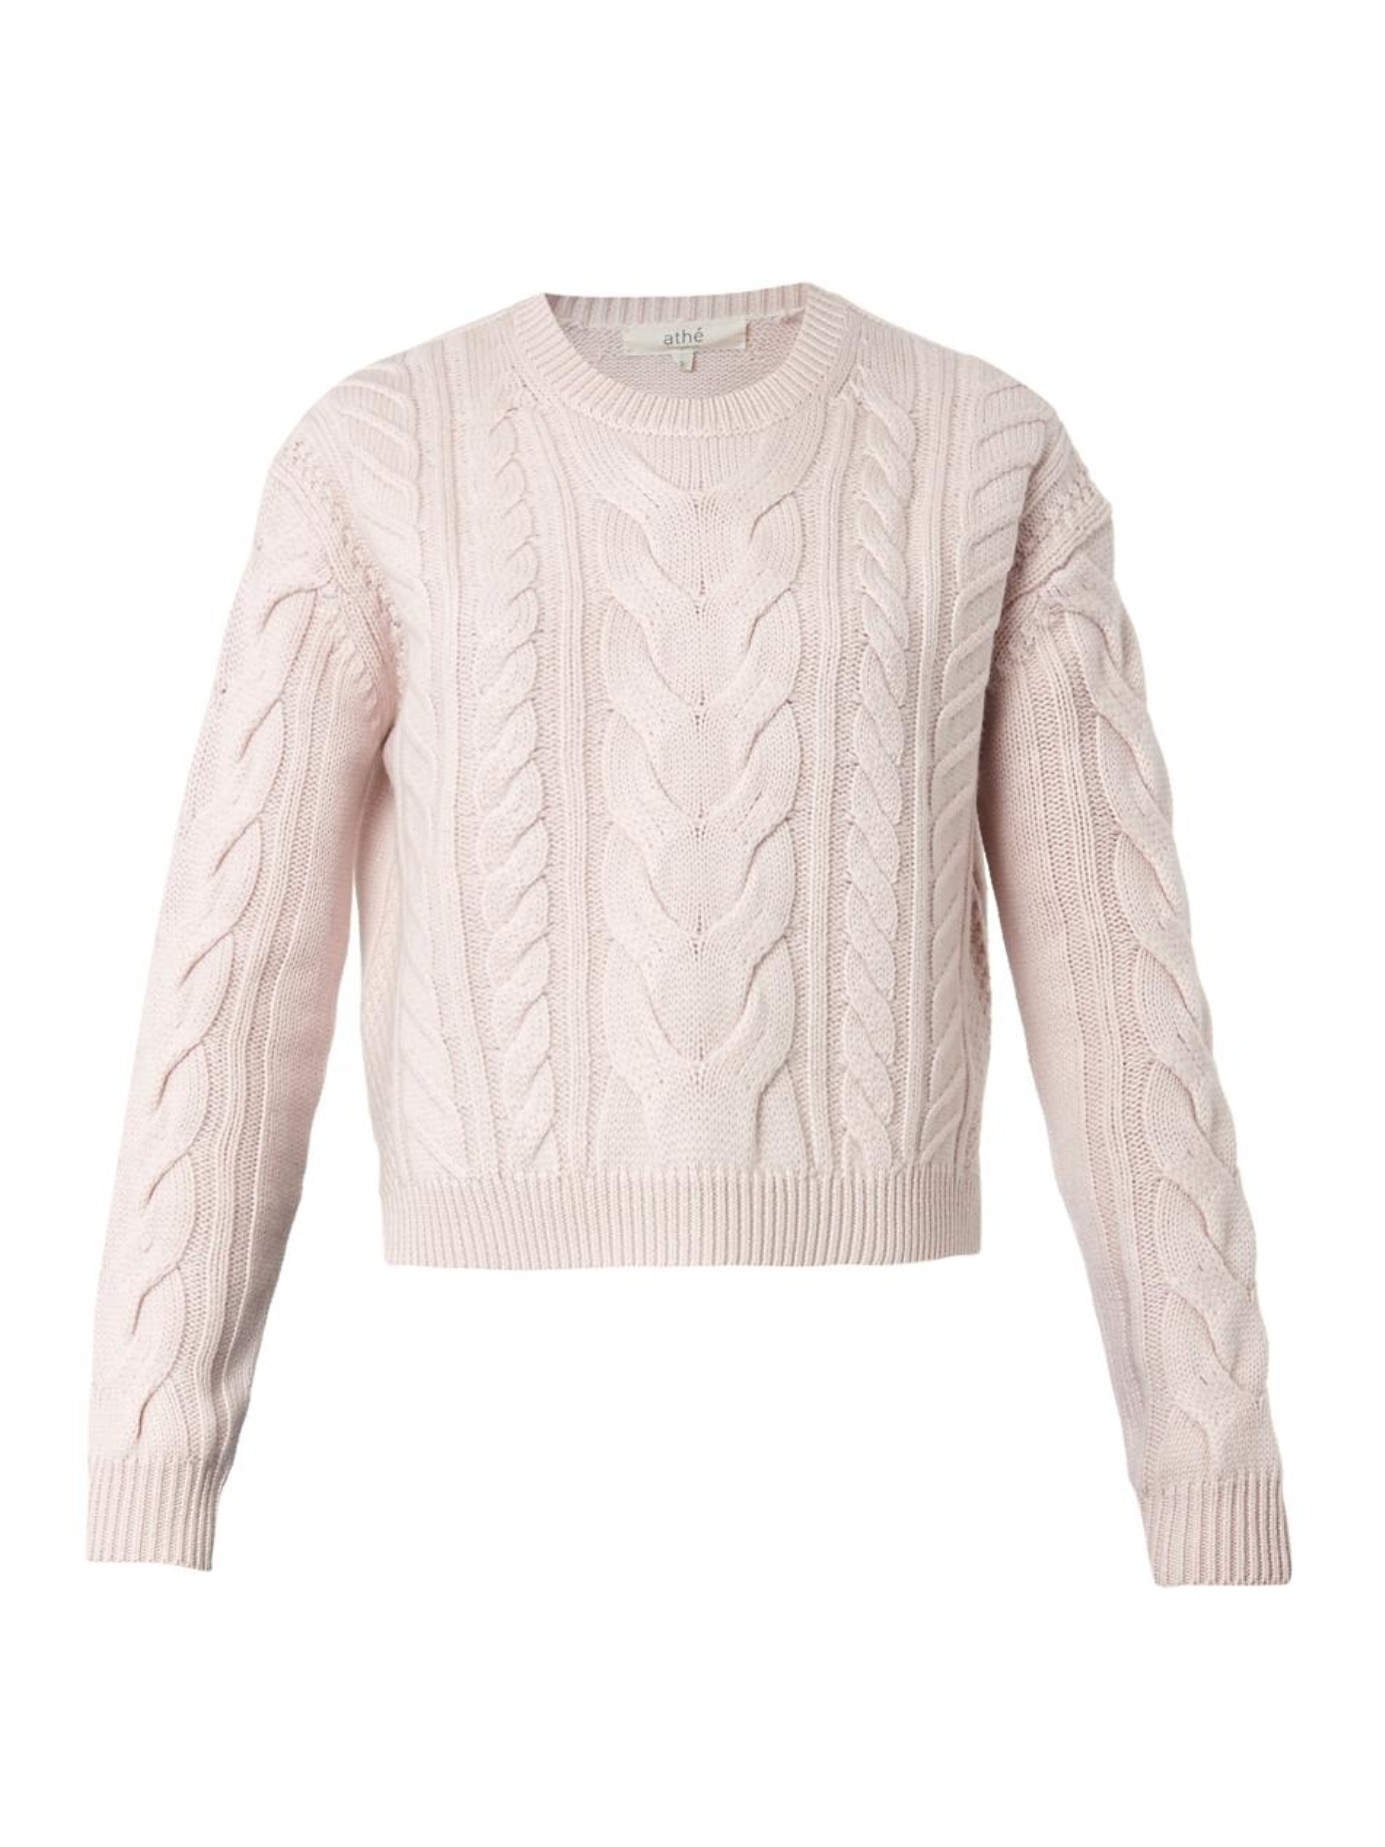 Vanessa bruno athé Bidule Cable-Knit Sweater in Pink | Lyst